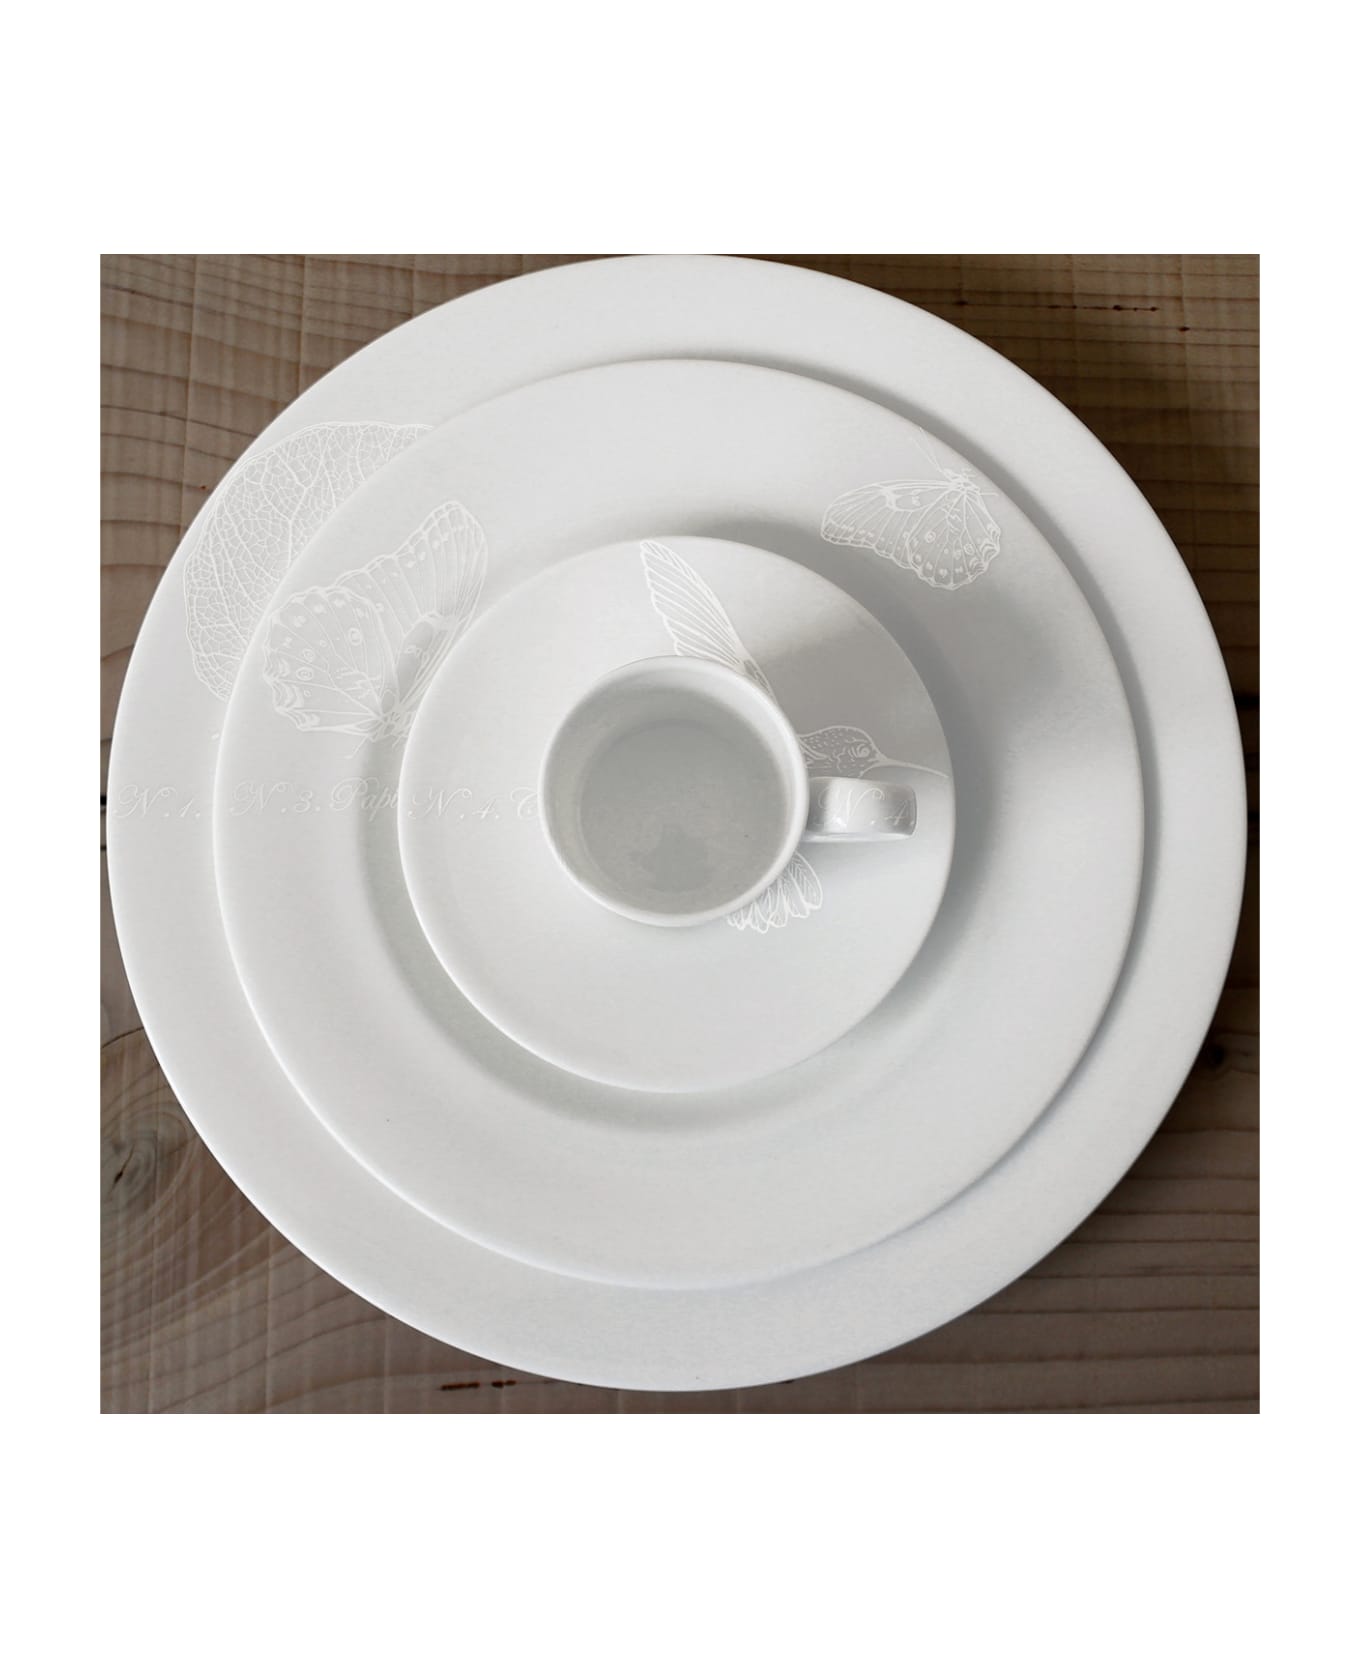 Taitù Set of 4 Espresso Cups & Saucers - Bianco&Bianco Collection - White